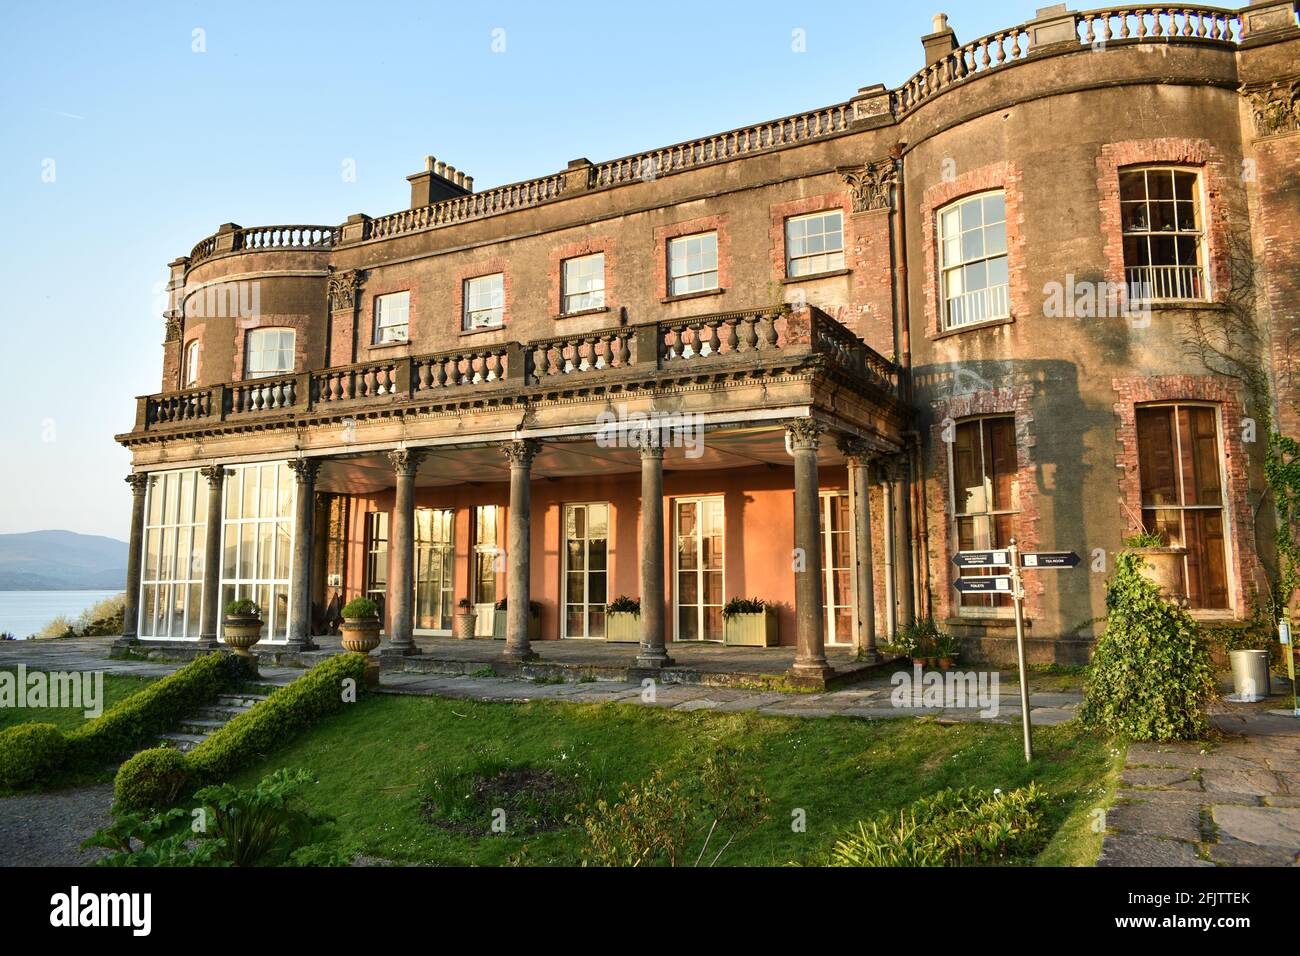 Bantry House and Gardens. Bantry, Co Cork. Irland. Stockfoto